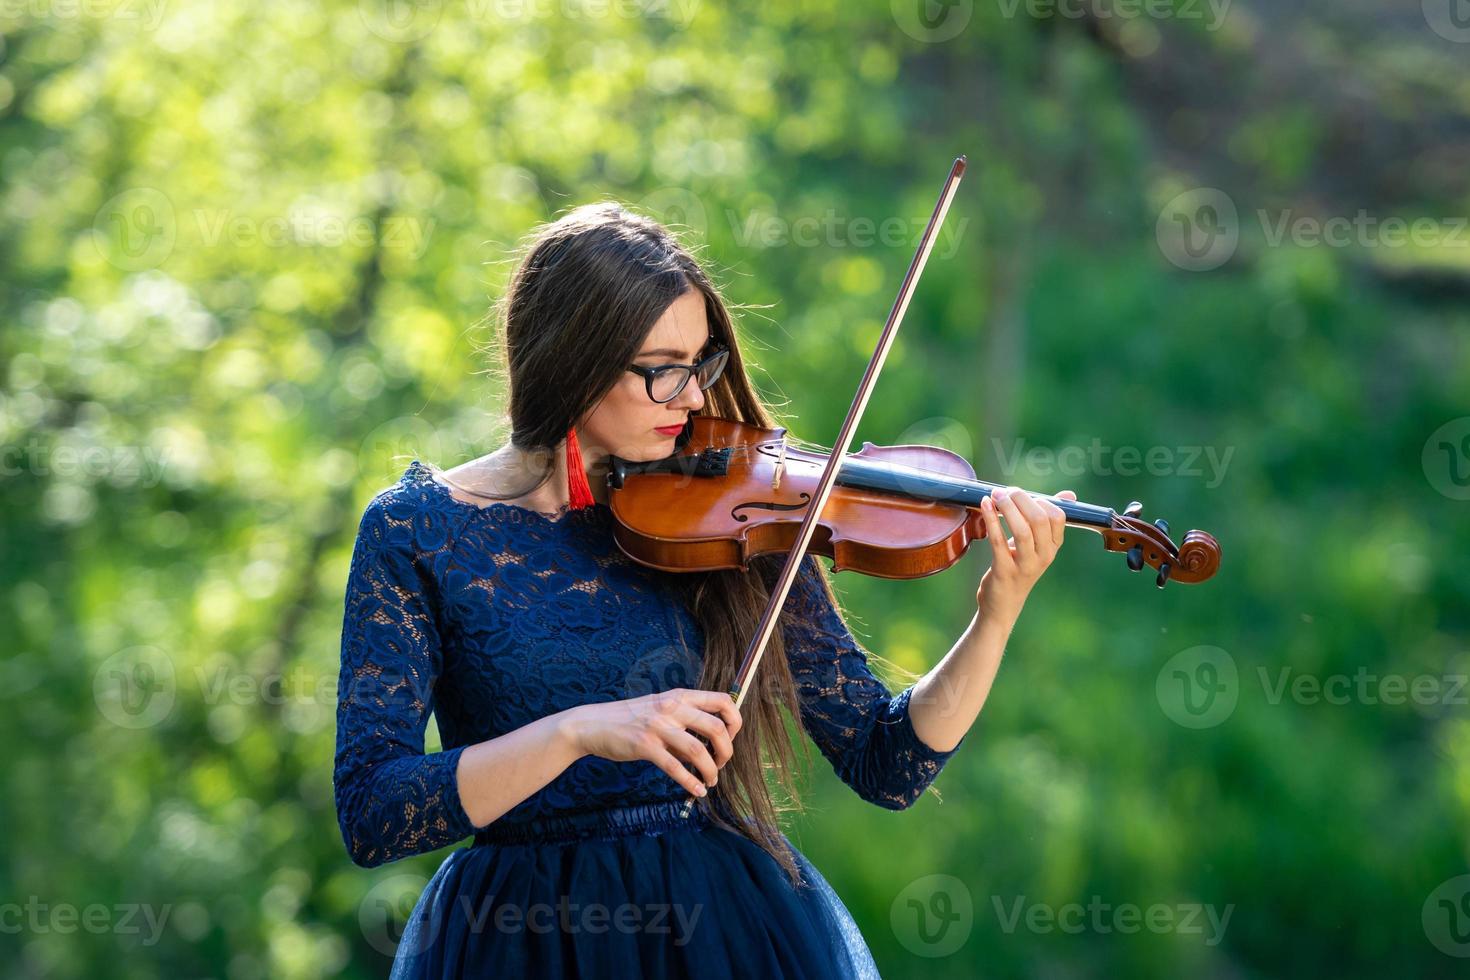 Young woman playing the violin at park. Shallow depth of field - image photo